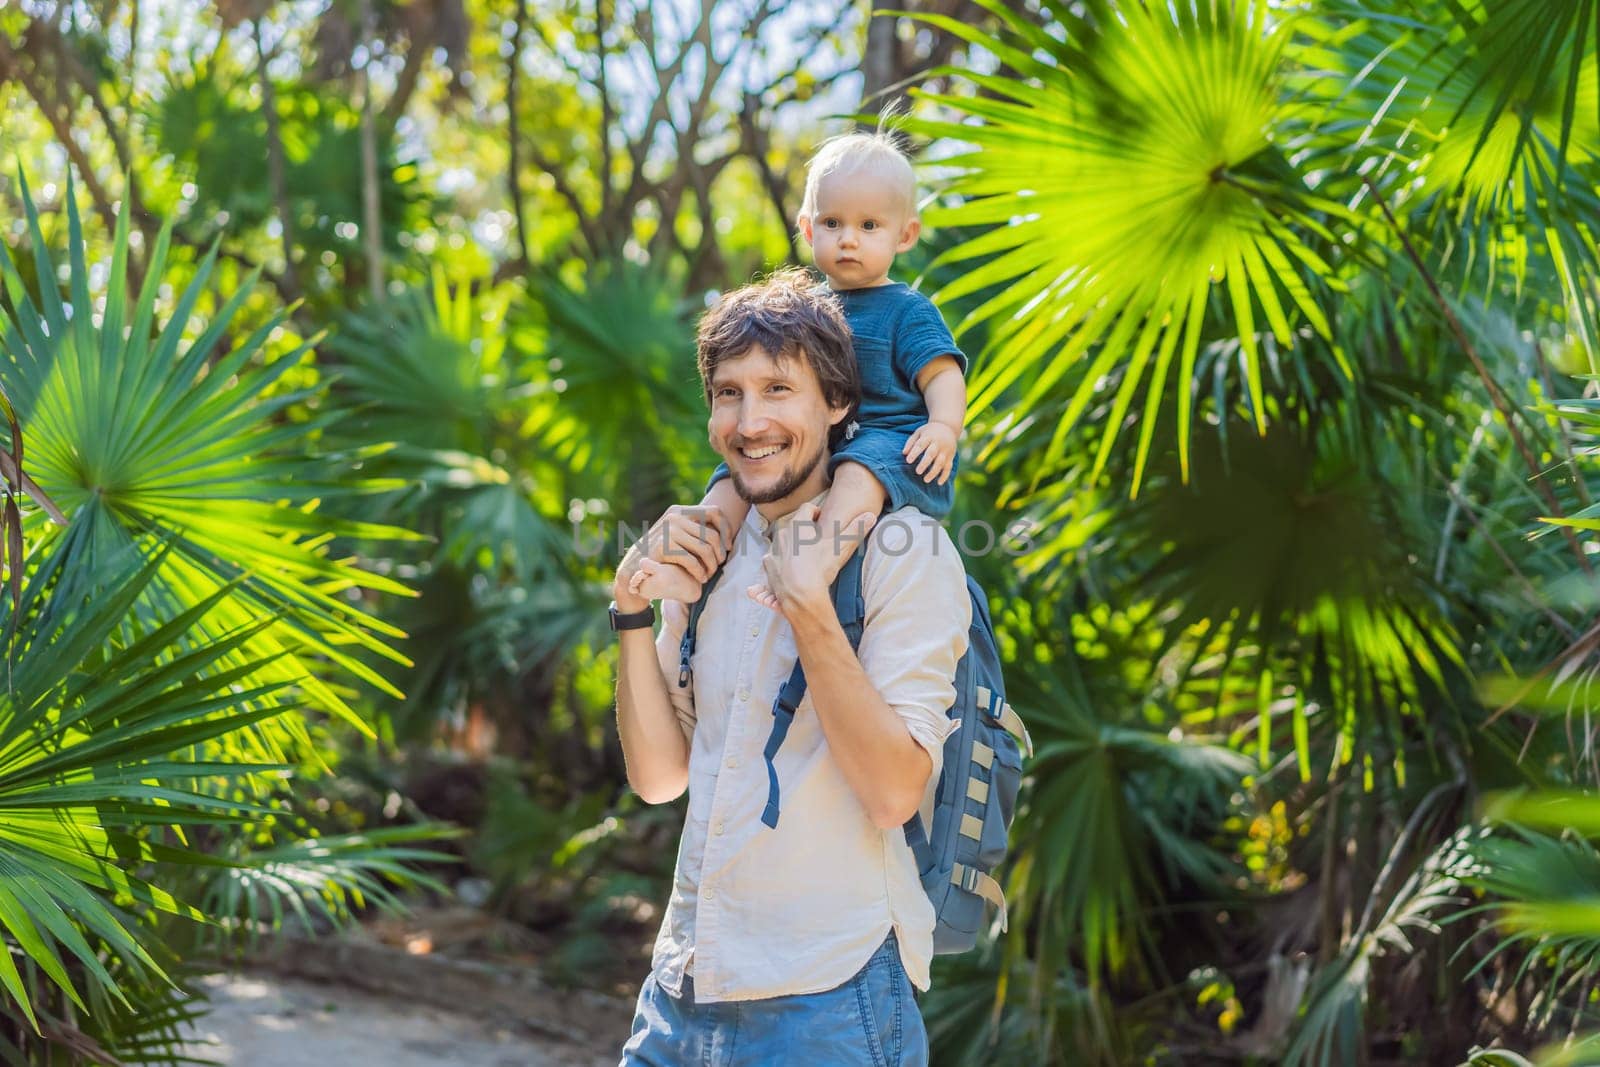 A man smiling while carrying a baby in the jungle, surrounded by lush vegetation by galitskaya